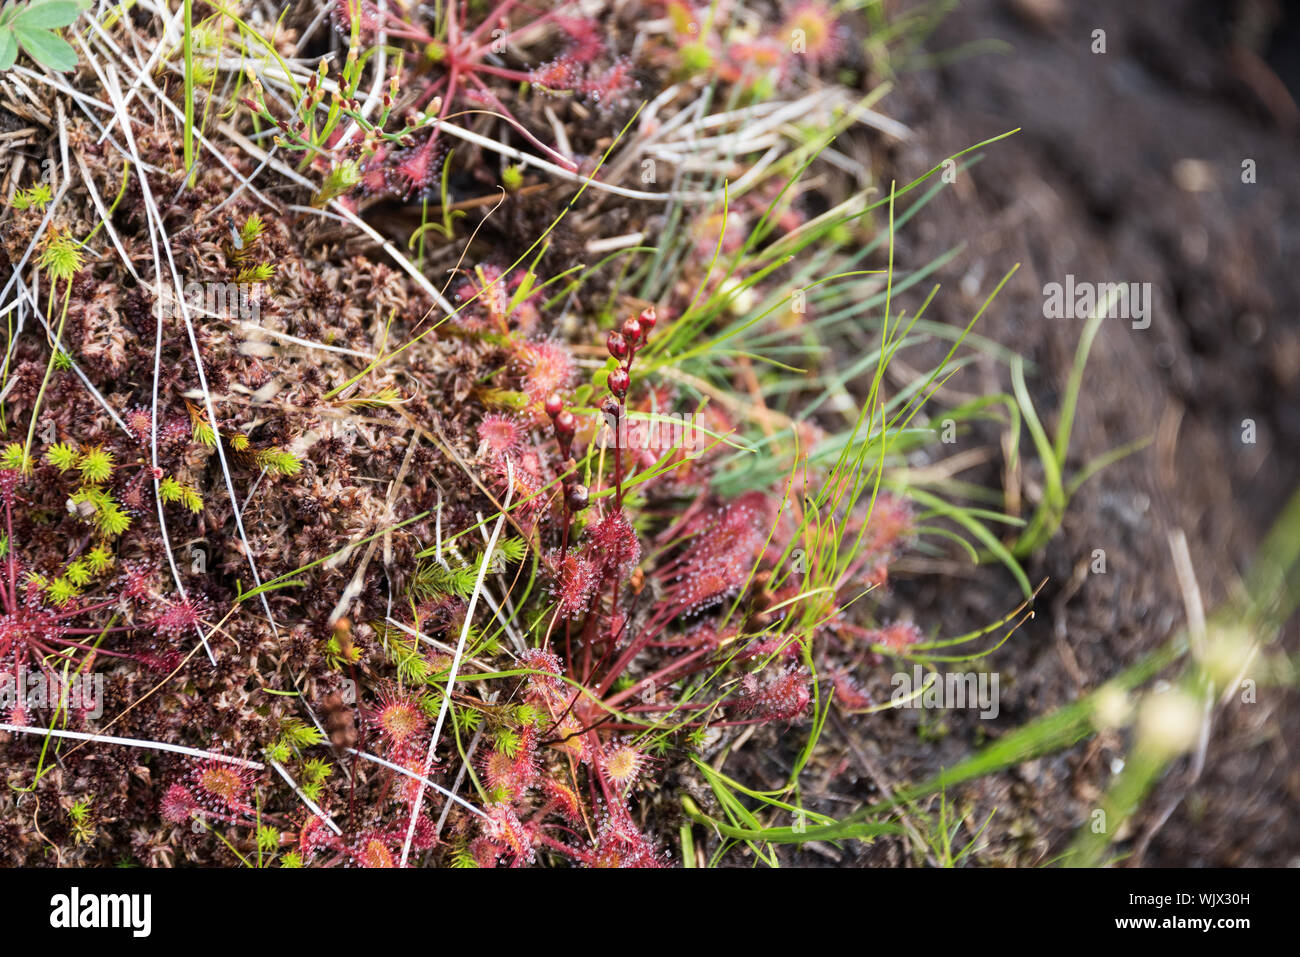 Round-leaved Sundews (Drosera rotundifolia) with seed pods in an alpine bog on the South Ridge trail of  Cadillac Mountain, Acadia National Park, Main Stock Photo